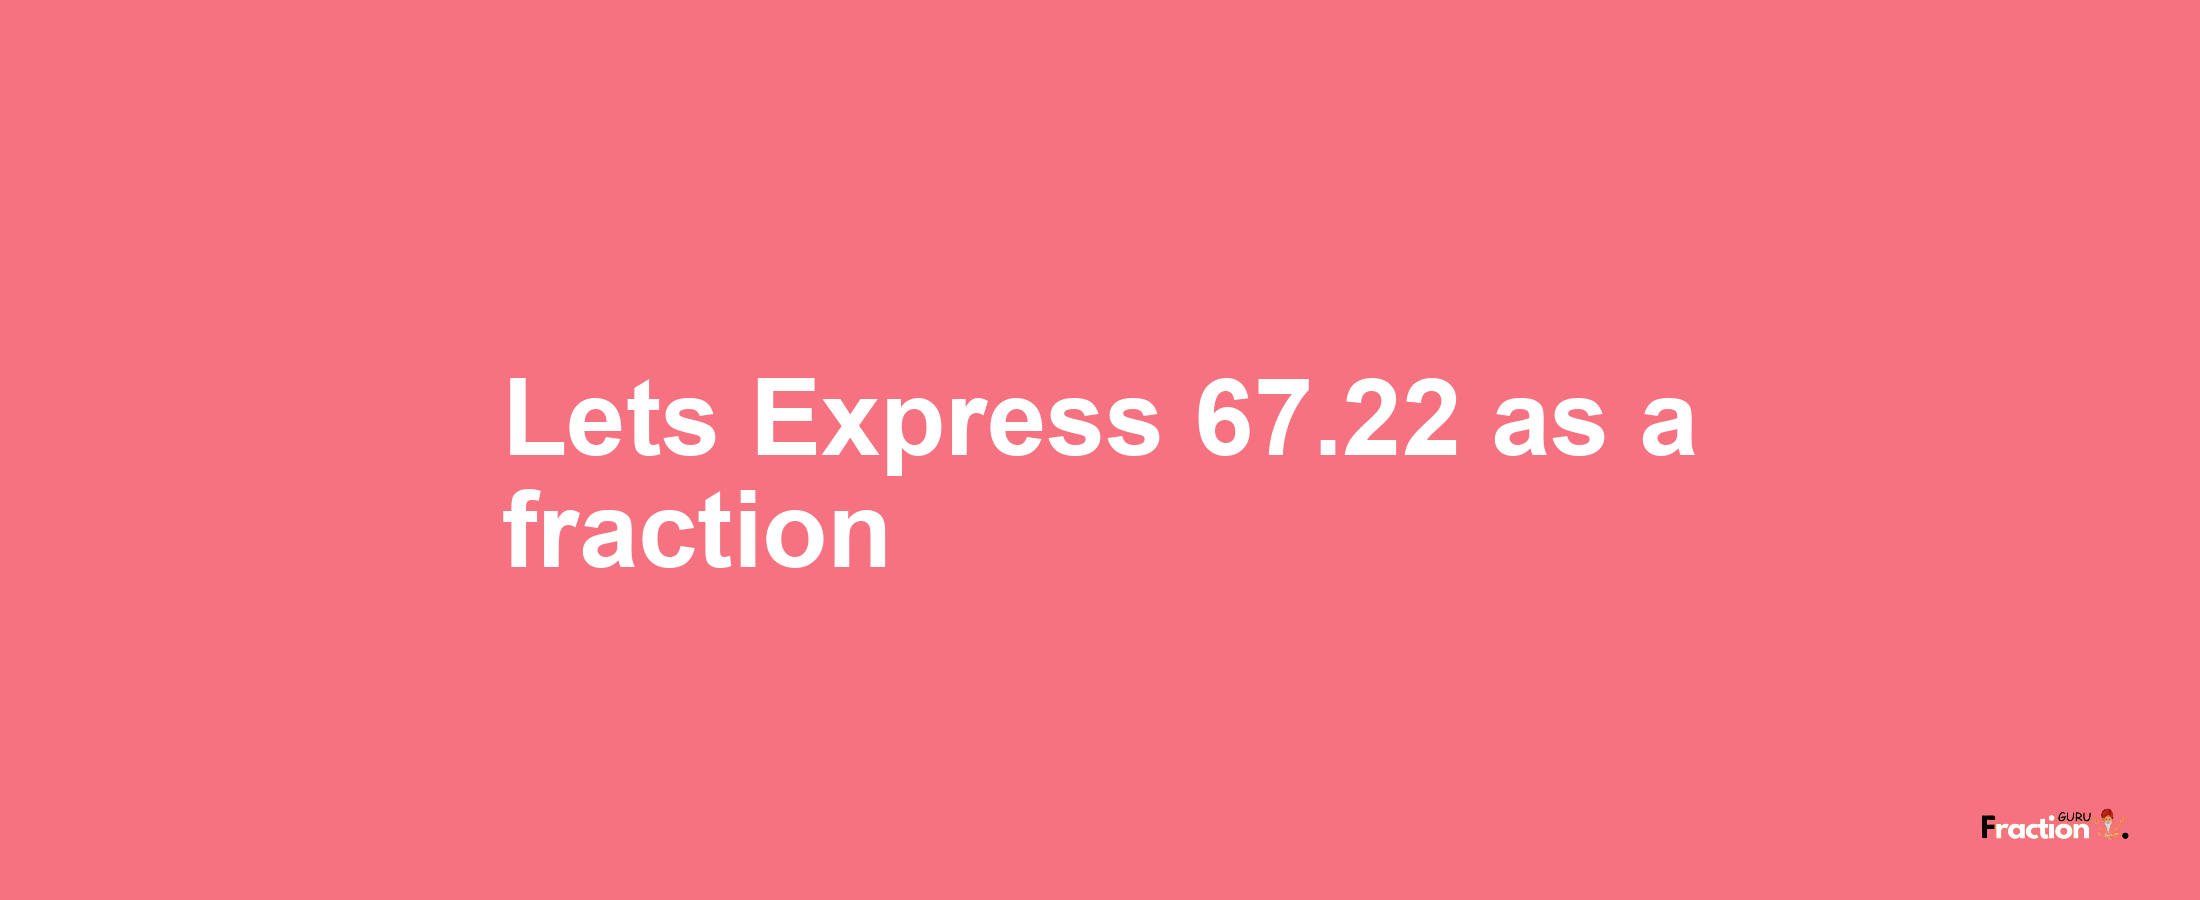 Lets Express 67.22 as afraction